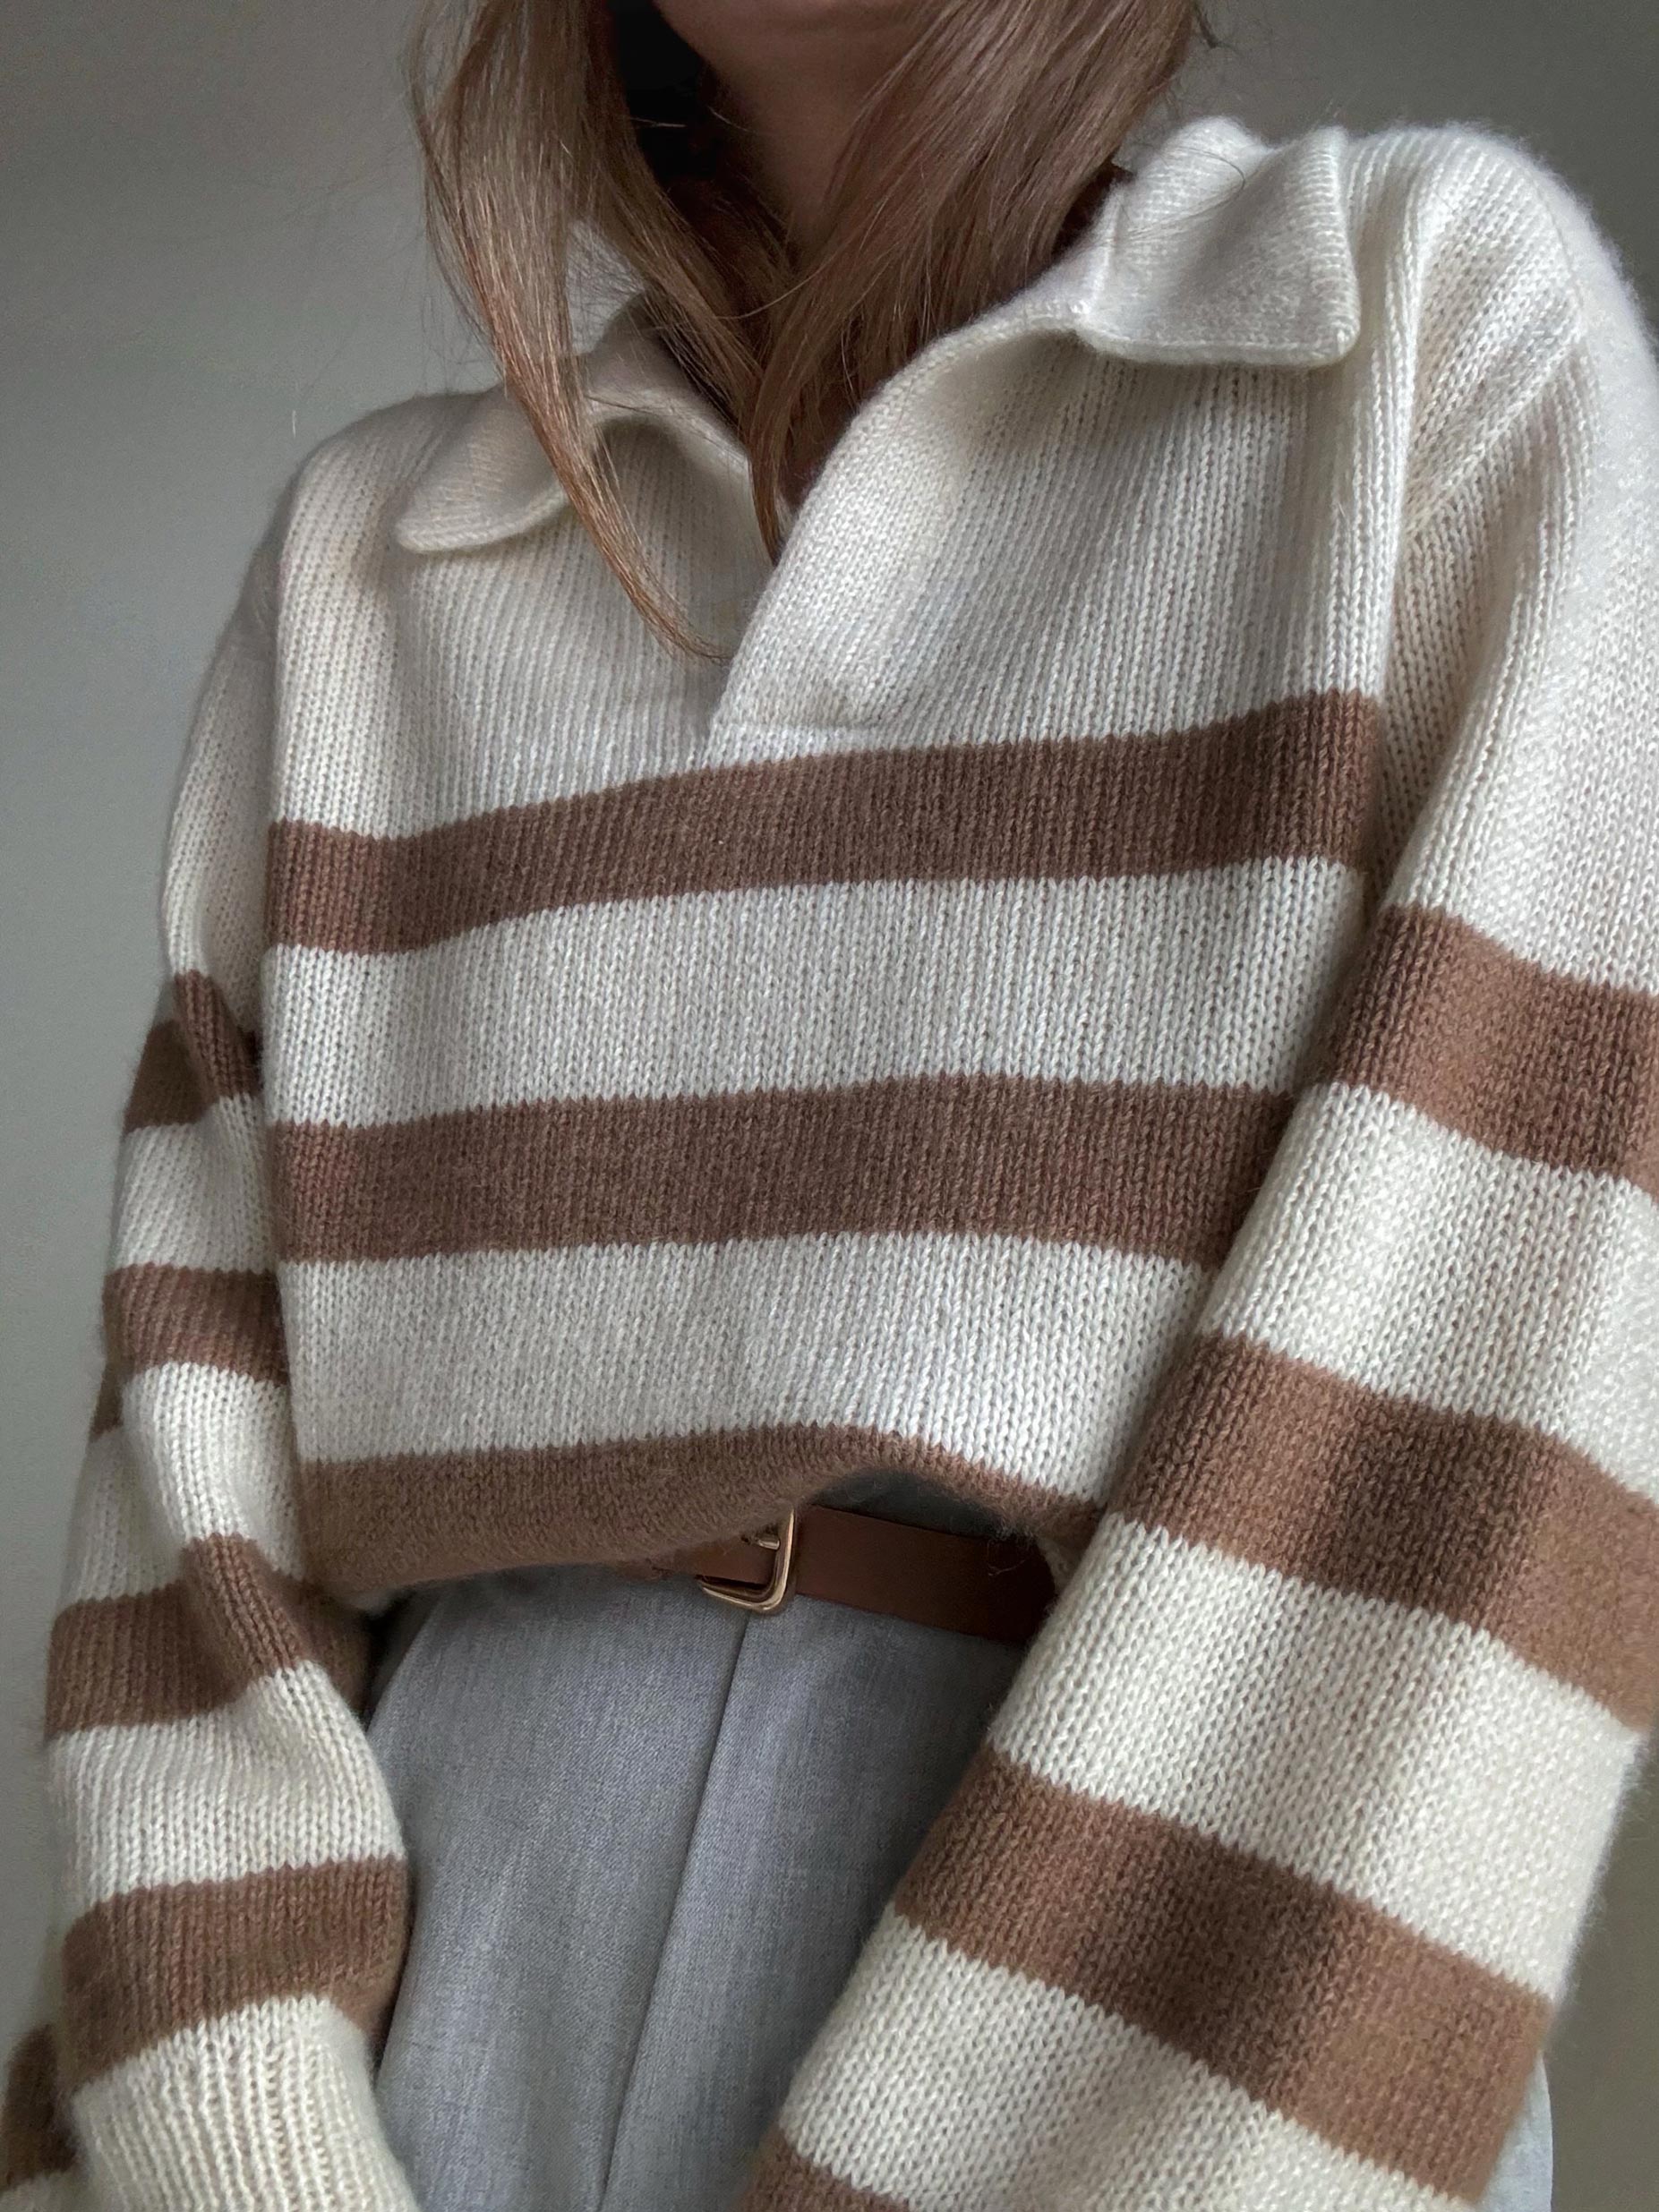 Knitwear design for ladies - Charlie Pullover with stripes